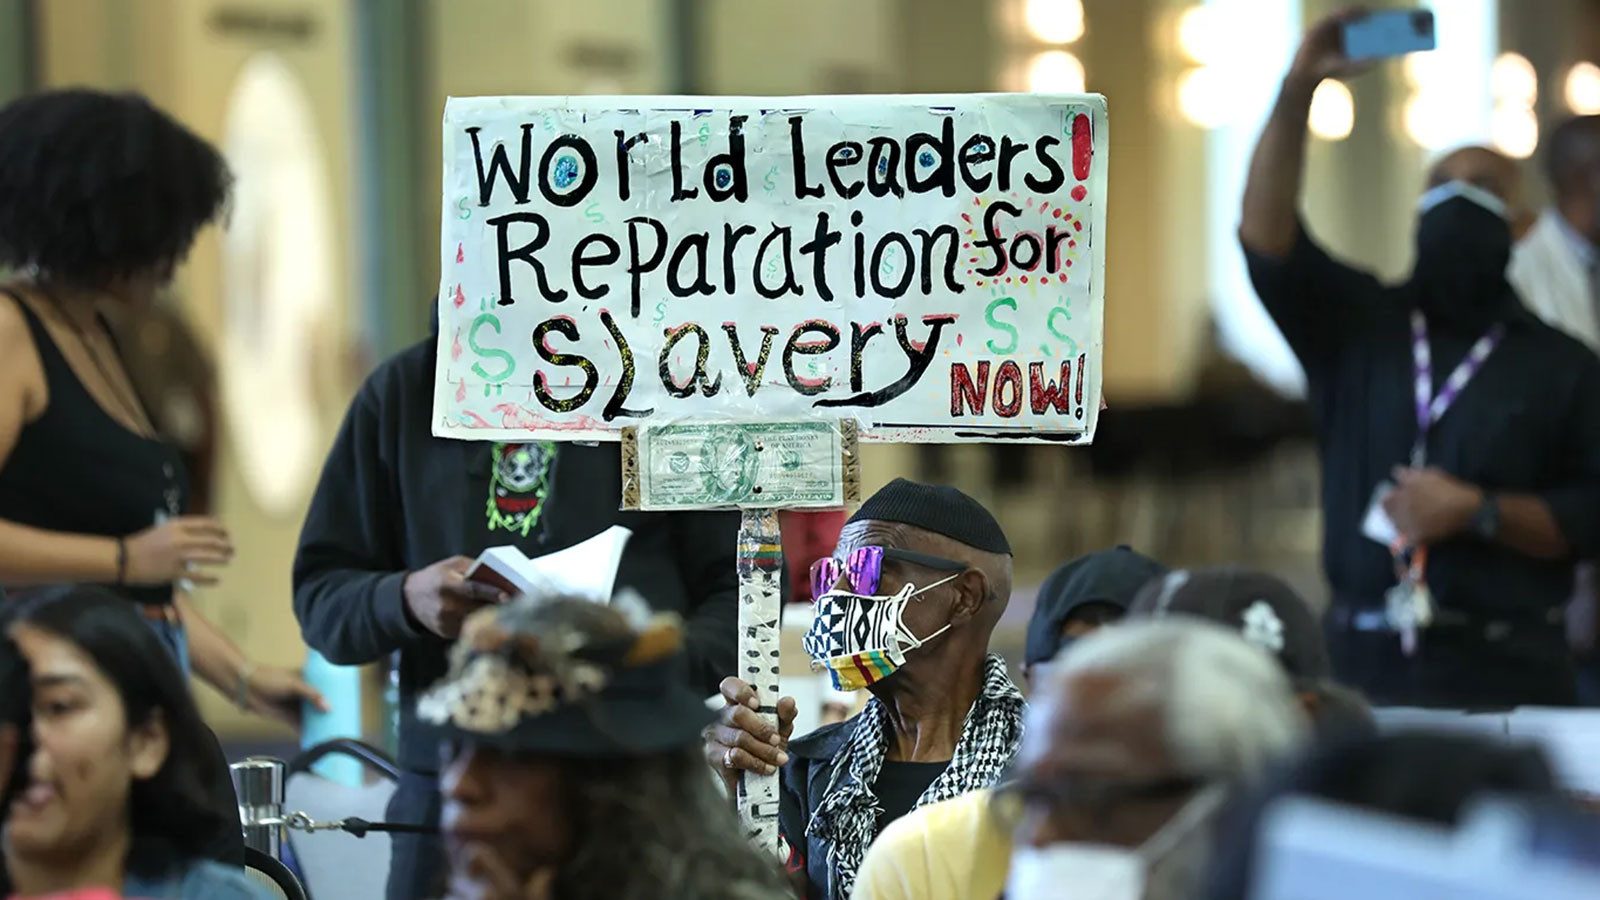 A man holds up a sign during a public hearing on reparations at the California Science Center in Los Angeles, CA on September 22, 2022.